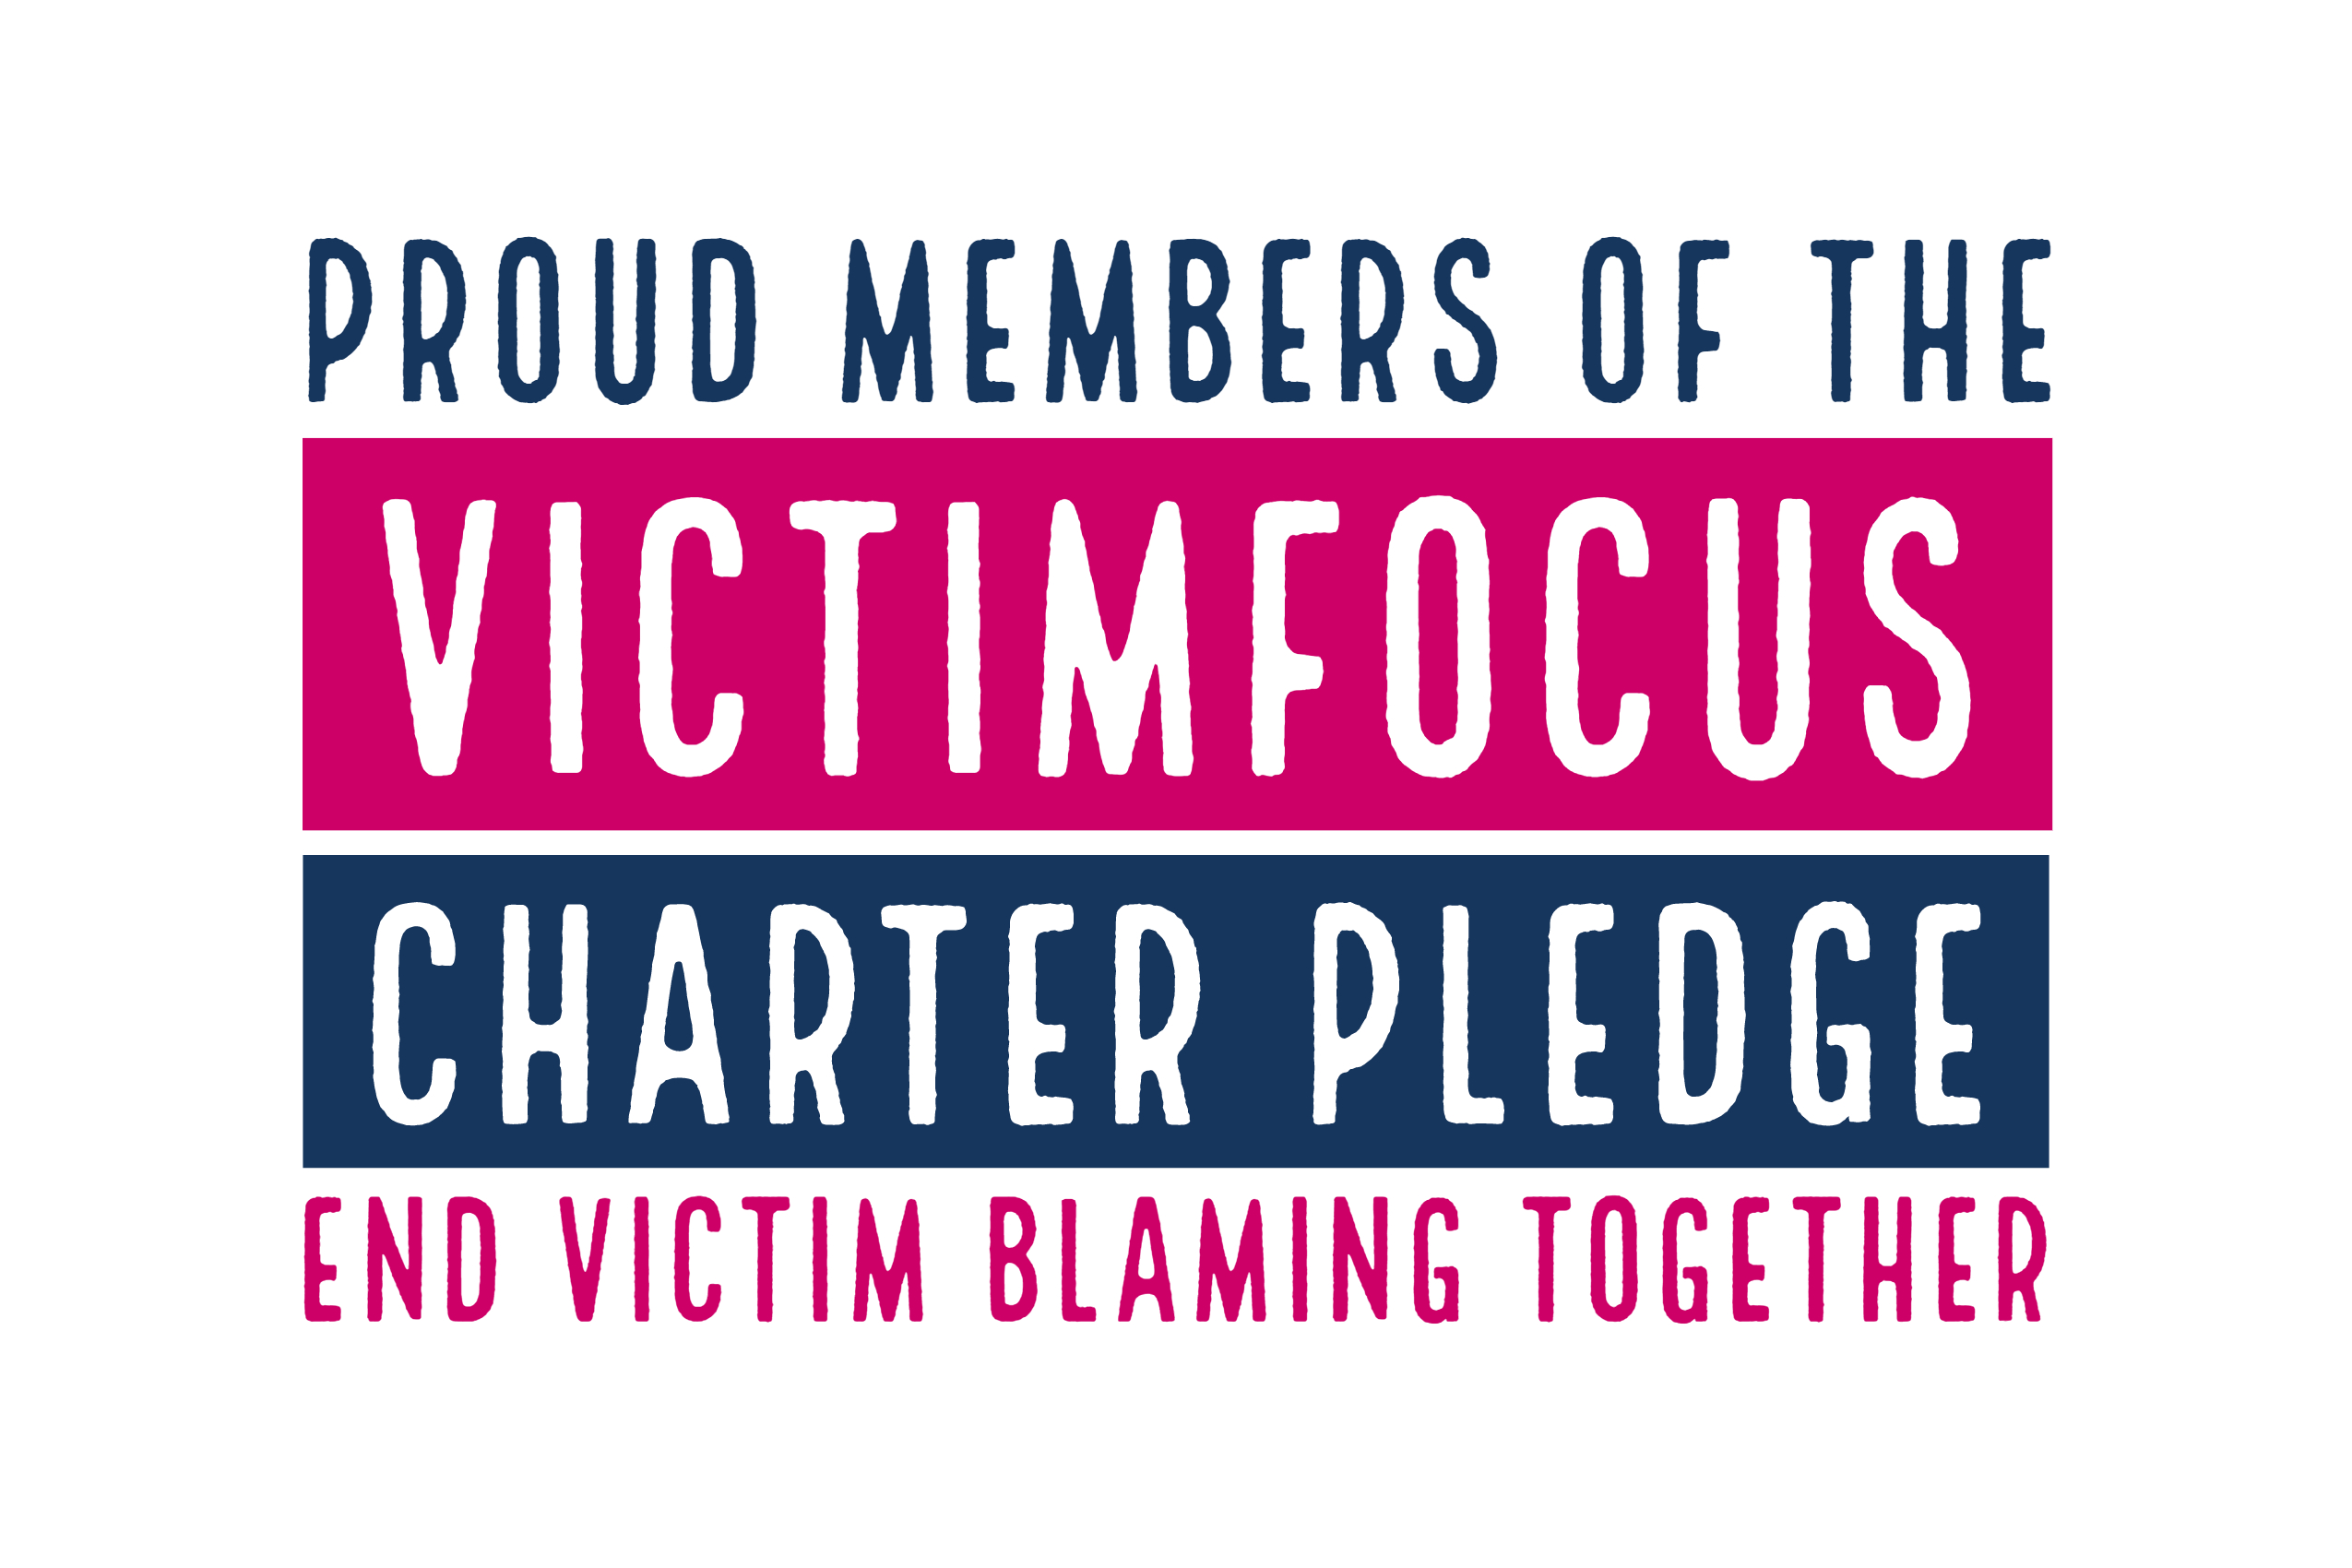 Proud members of the Victim Focus Charter Pledge end victim blaming together